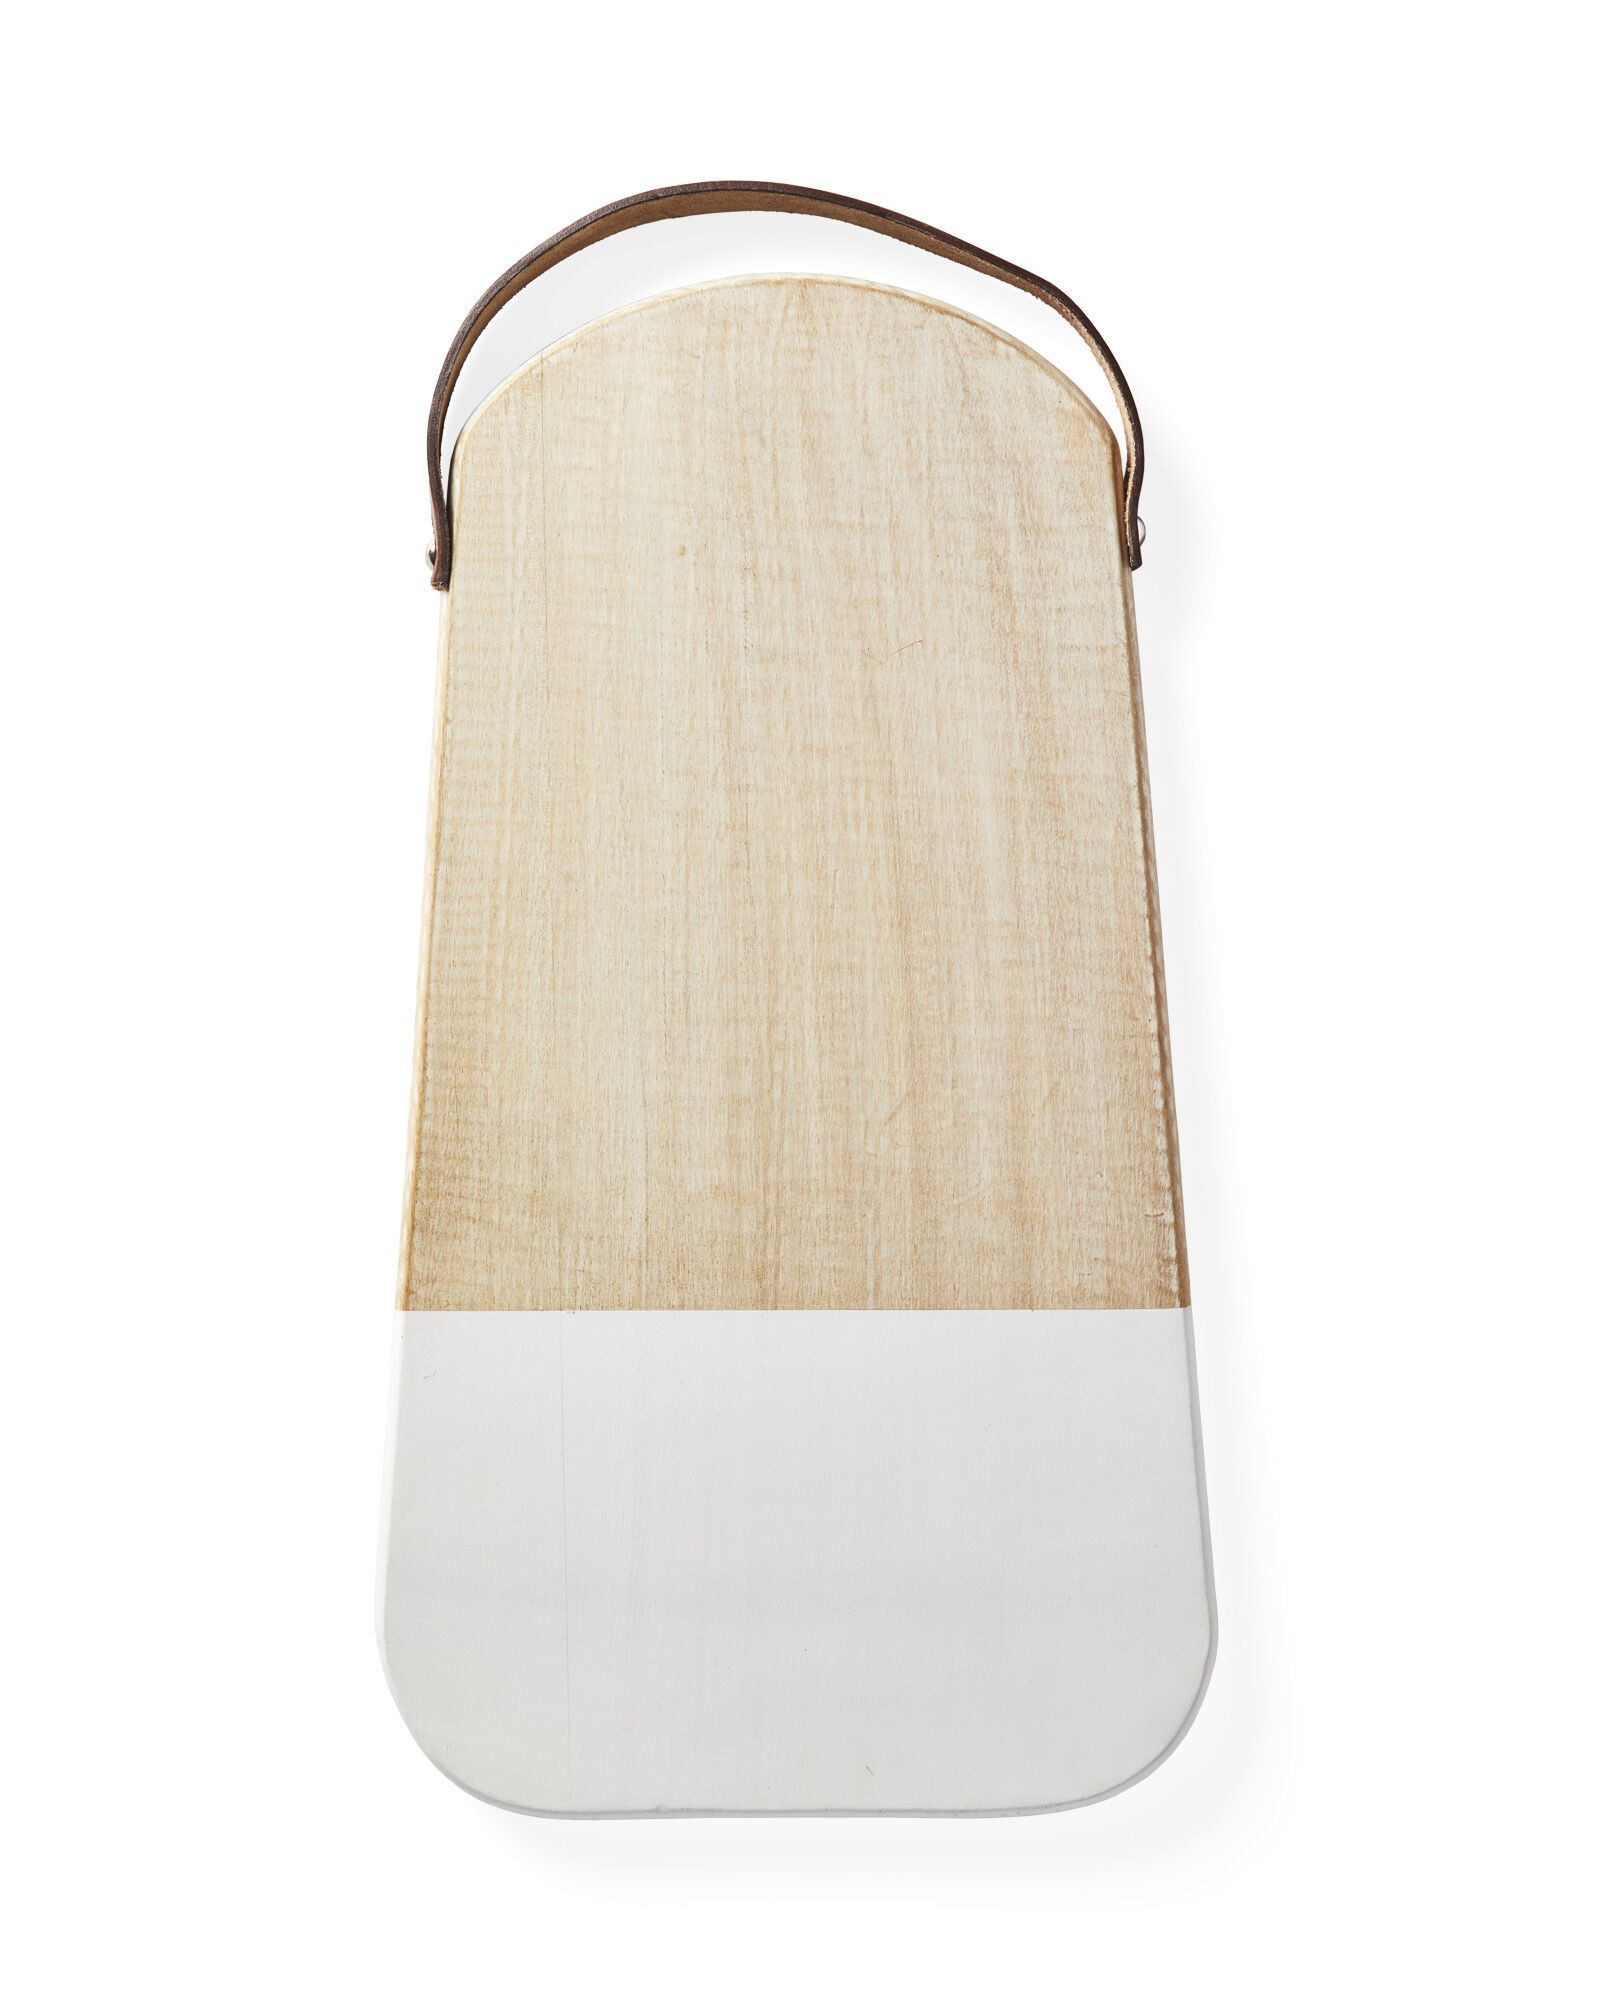 Beachside Serving Board | Serena and Lily